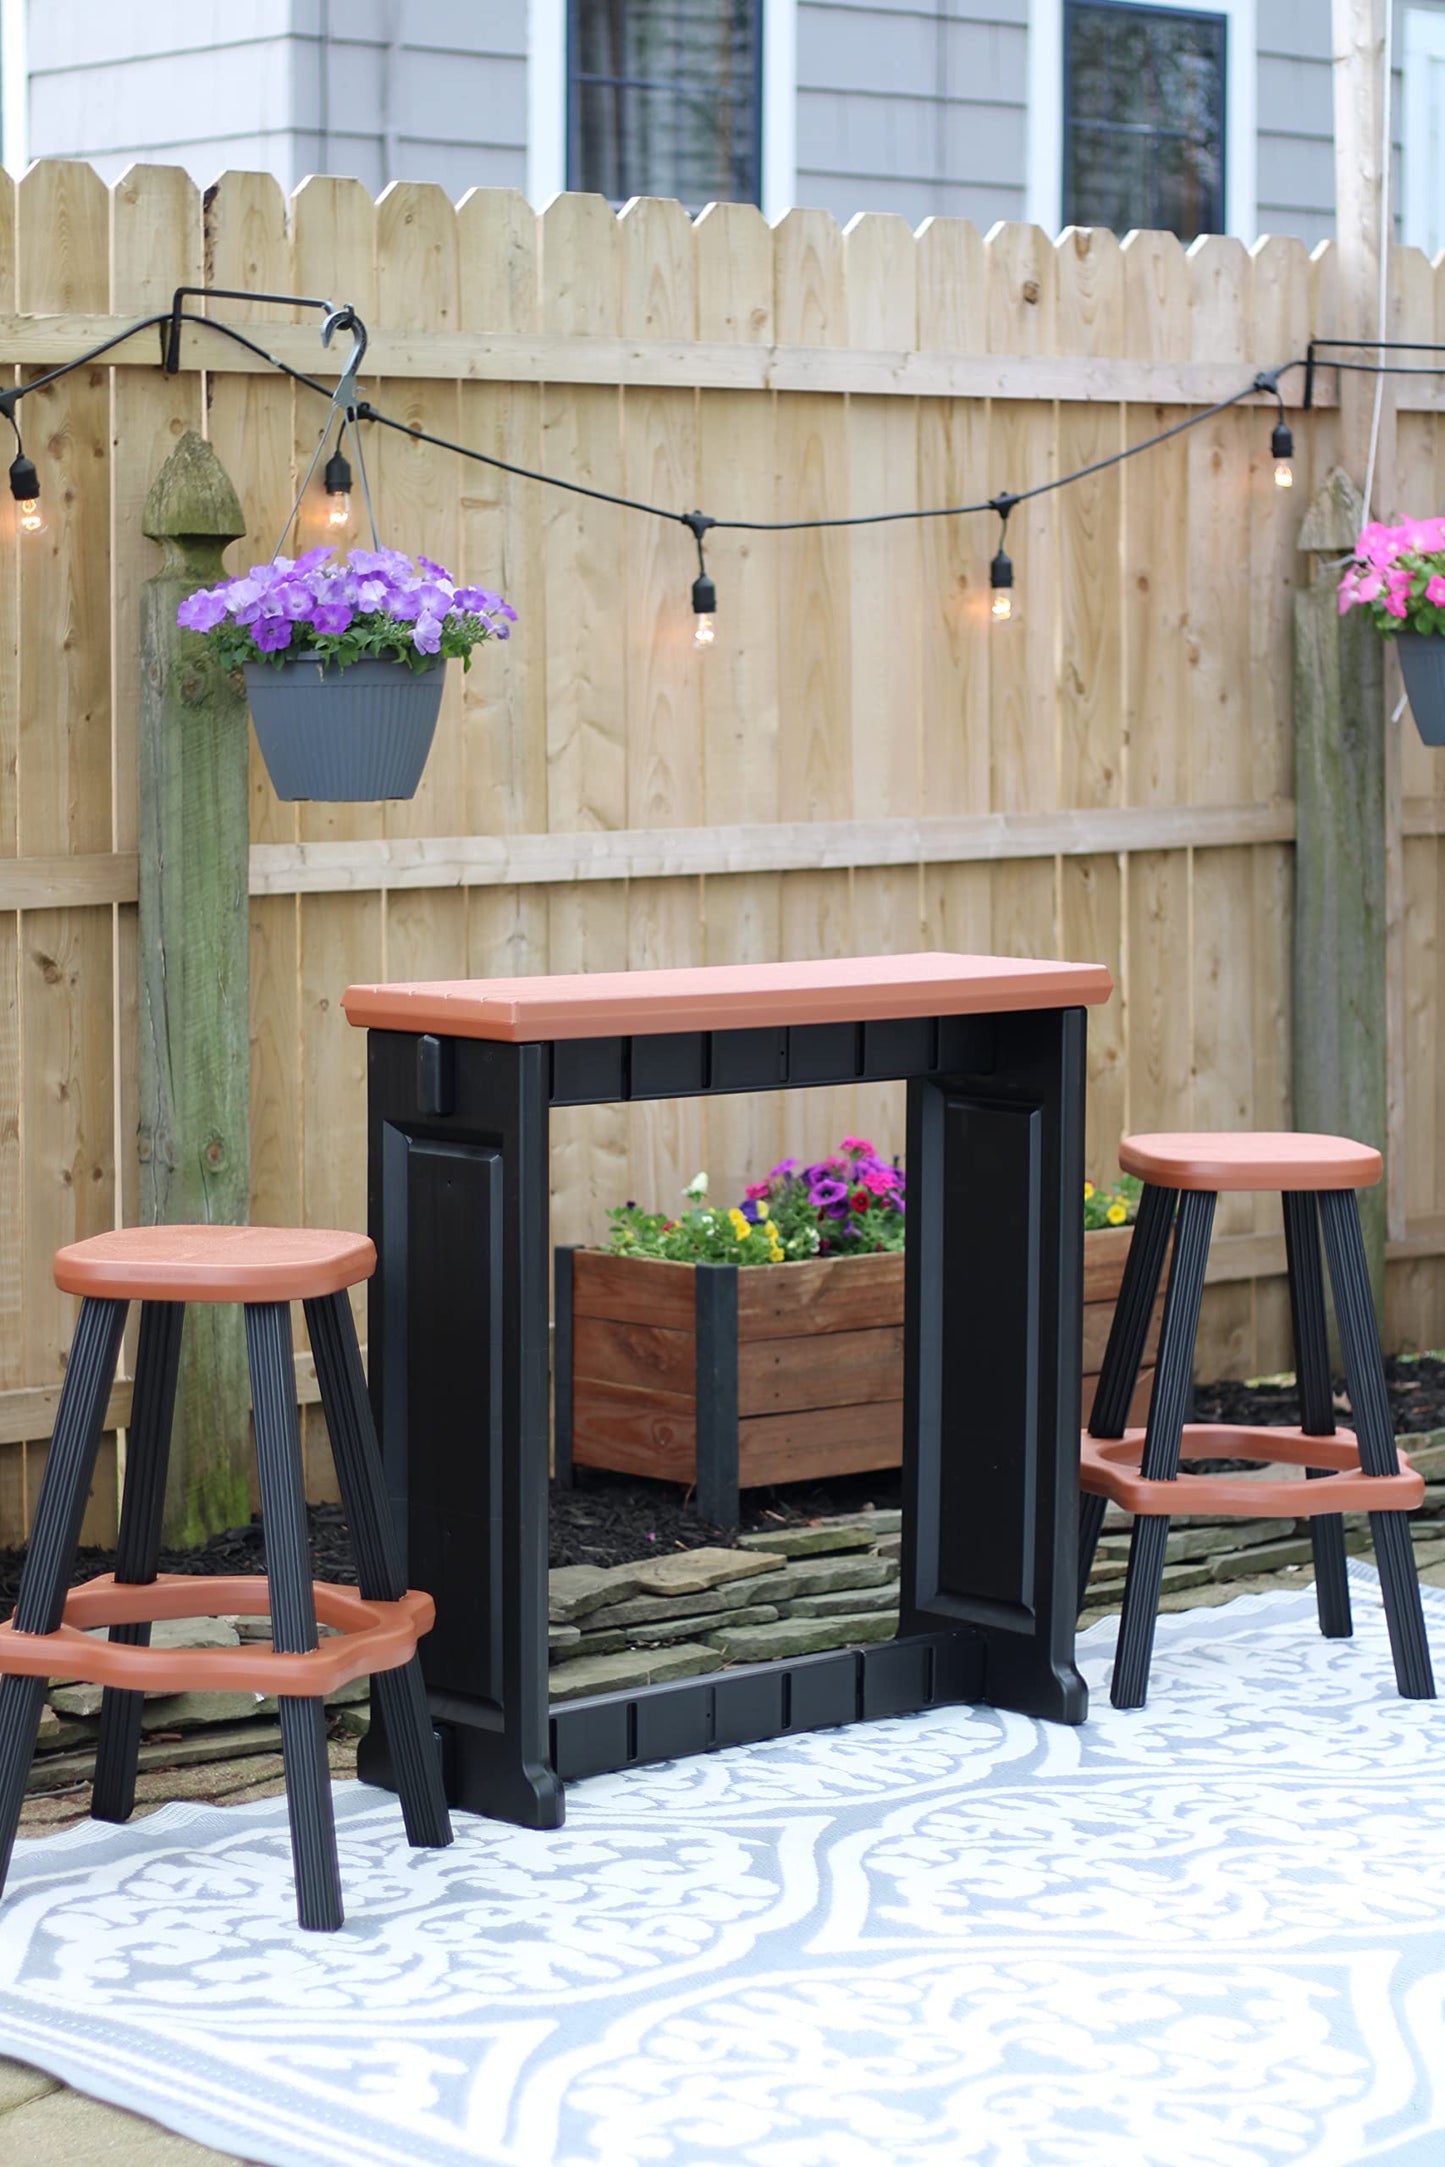 Leisure Accents Single Bar Set Includes 2 Barstools Redwood Top & Black Base Ideal for Patio Hot Tub Area Backyard Durable WeatherResistant Design Easy Nohardware Assembly Proudly Made in USA